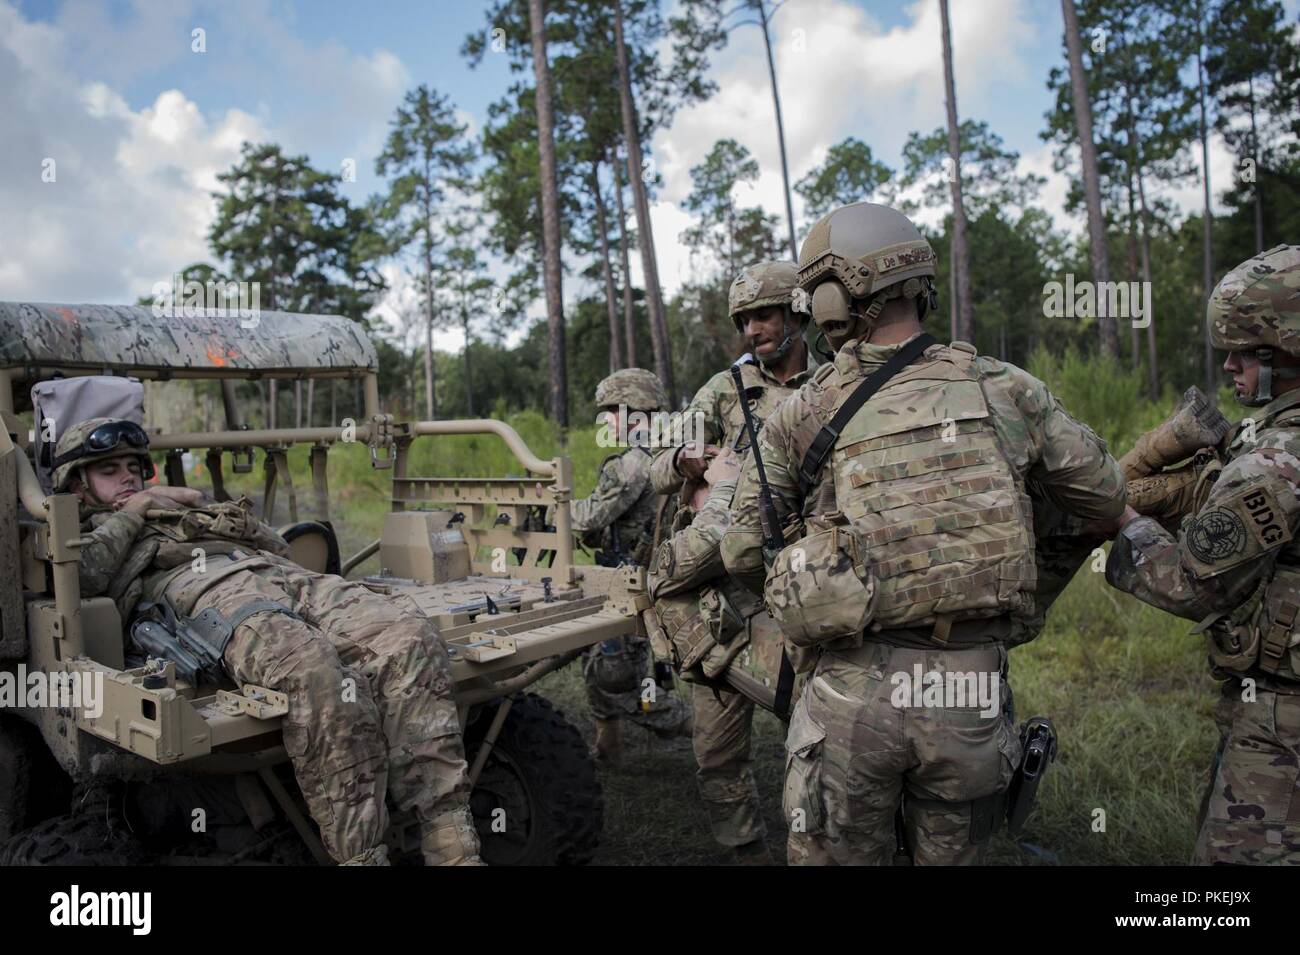 Airmen from the 822d Base Defense Squadron (BDS) place a simulated injured Airman on the back of a military RZR all-terrain vehicle during a full mission profile assessment, July 24, 2018, at Moody Air Force Base, Ga. The ‘Safeside’ defenders evaluated their base defense tactics and procedures while performing patrols, tactical combat casualty care and countering improvised explosive for a mission readiness exercise. After successfully completing these events, the defenders are eligible to earn their Global Response Force status, which certifies the unit to deploy worldwide. Stock Photo